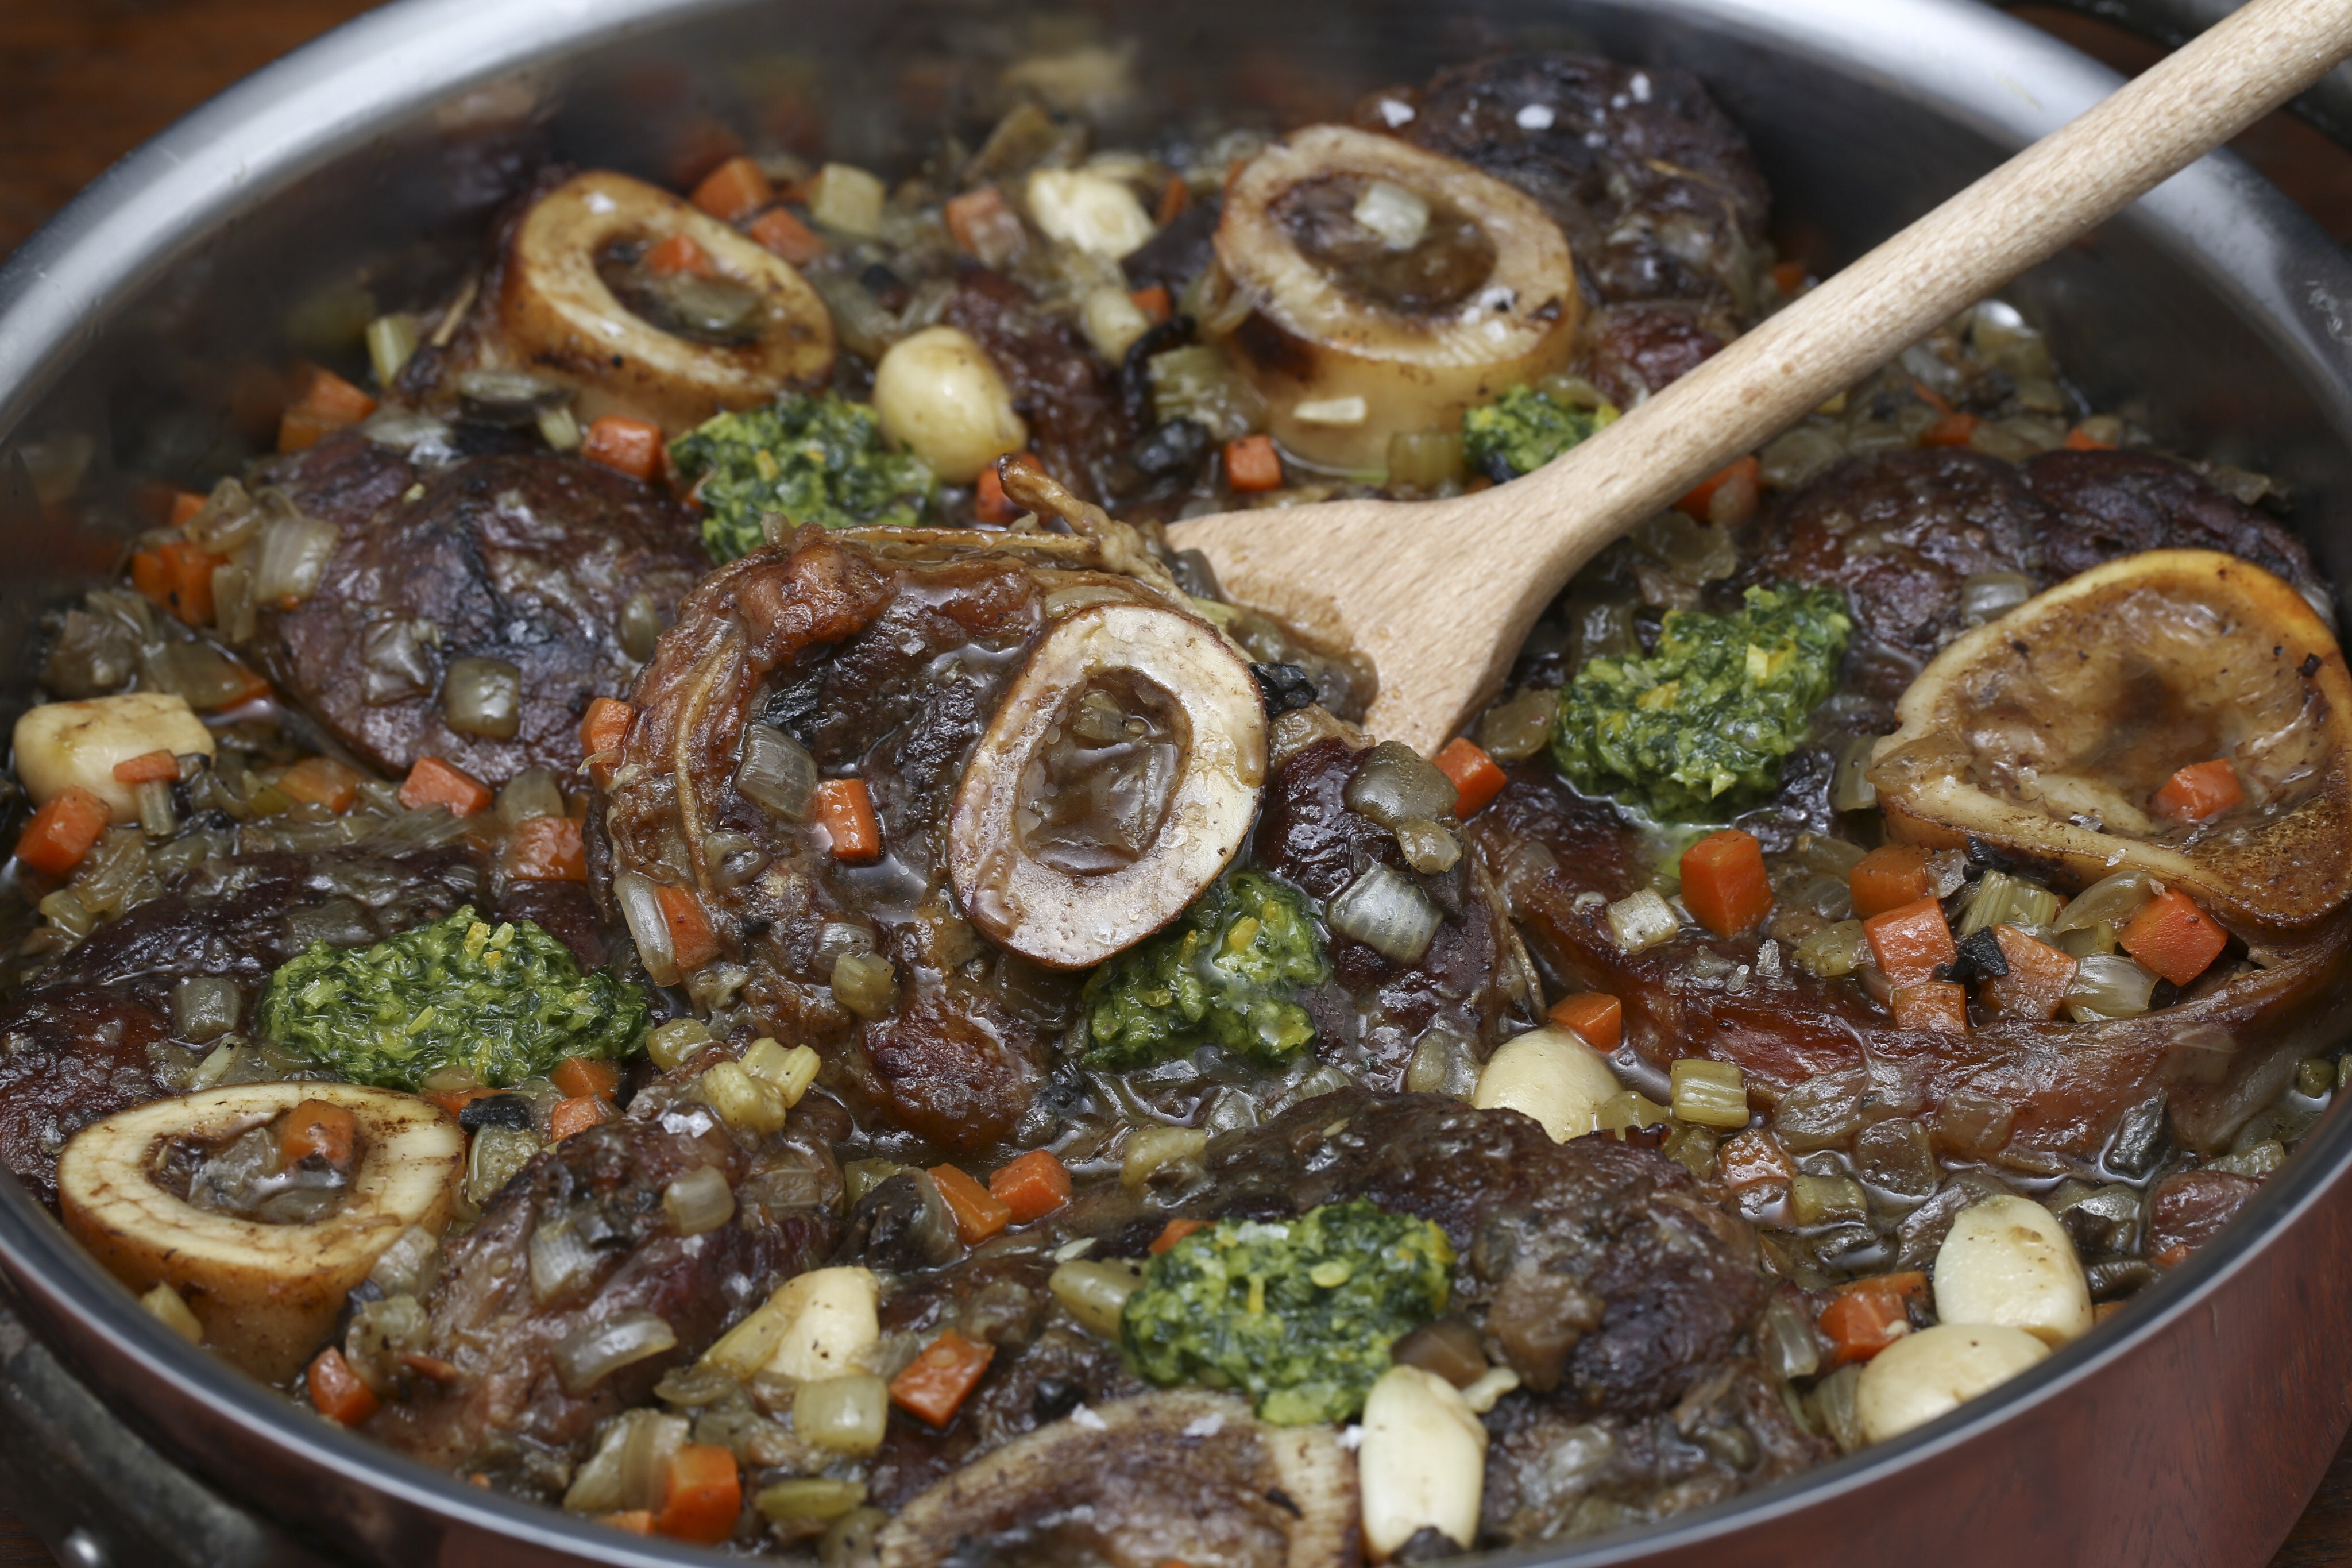 Braised veal shanks with porcini and gremolata. A rich and meaty slow-cooked Italian classic. Photo: Jonathan Wong